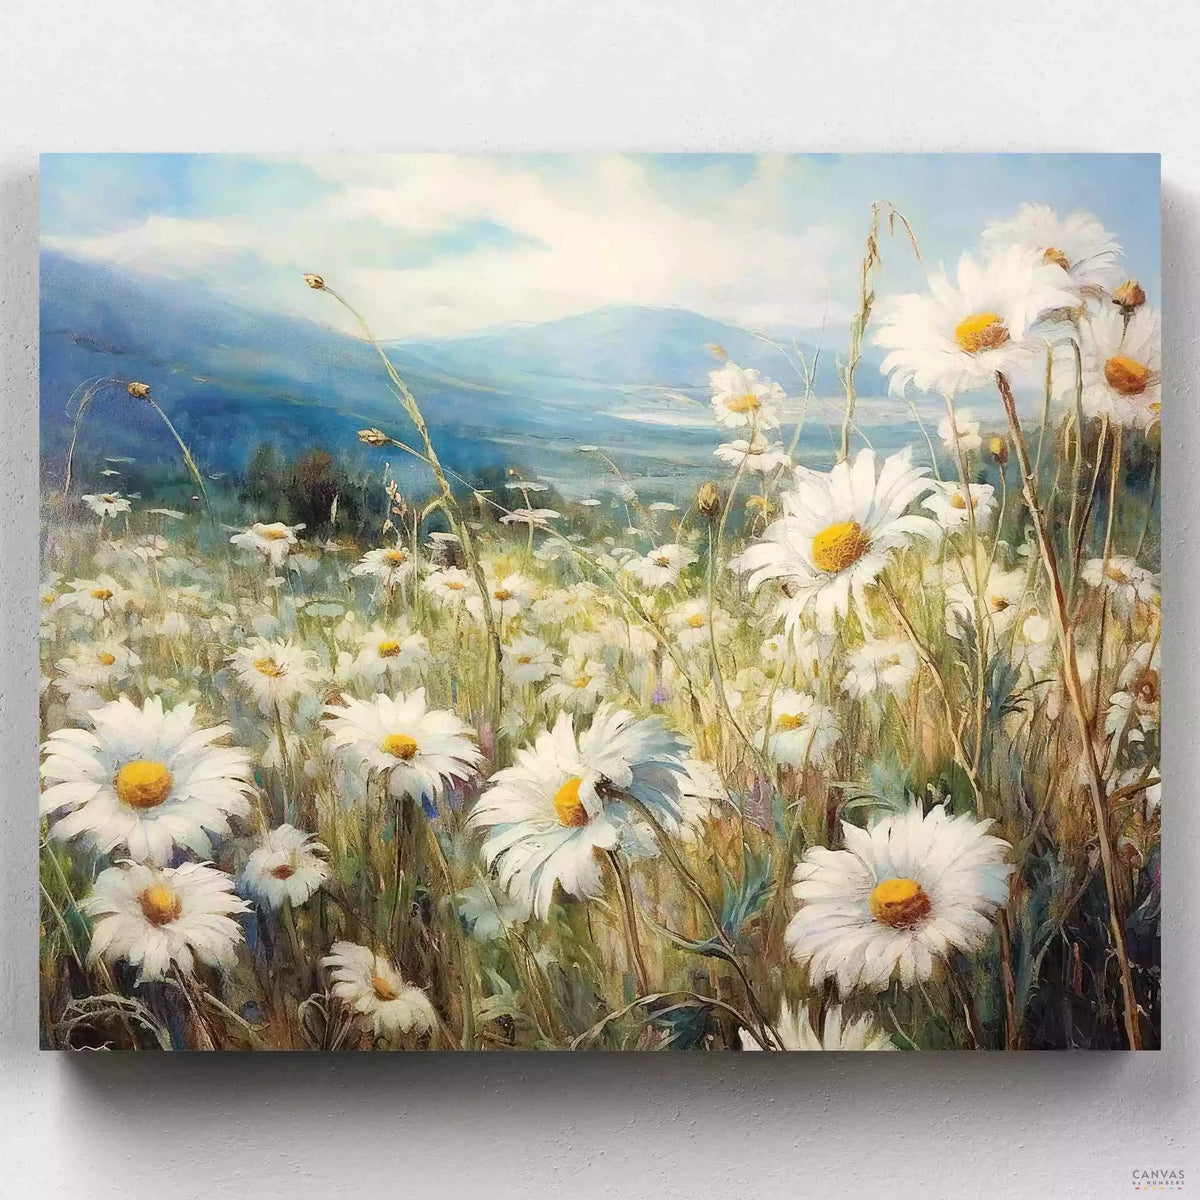 Daisy Meadows - Paint by Numbers-Paint by Numbers-16"x20" (40x50cm) No Frame-Canvas by Numbers US